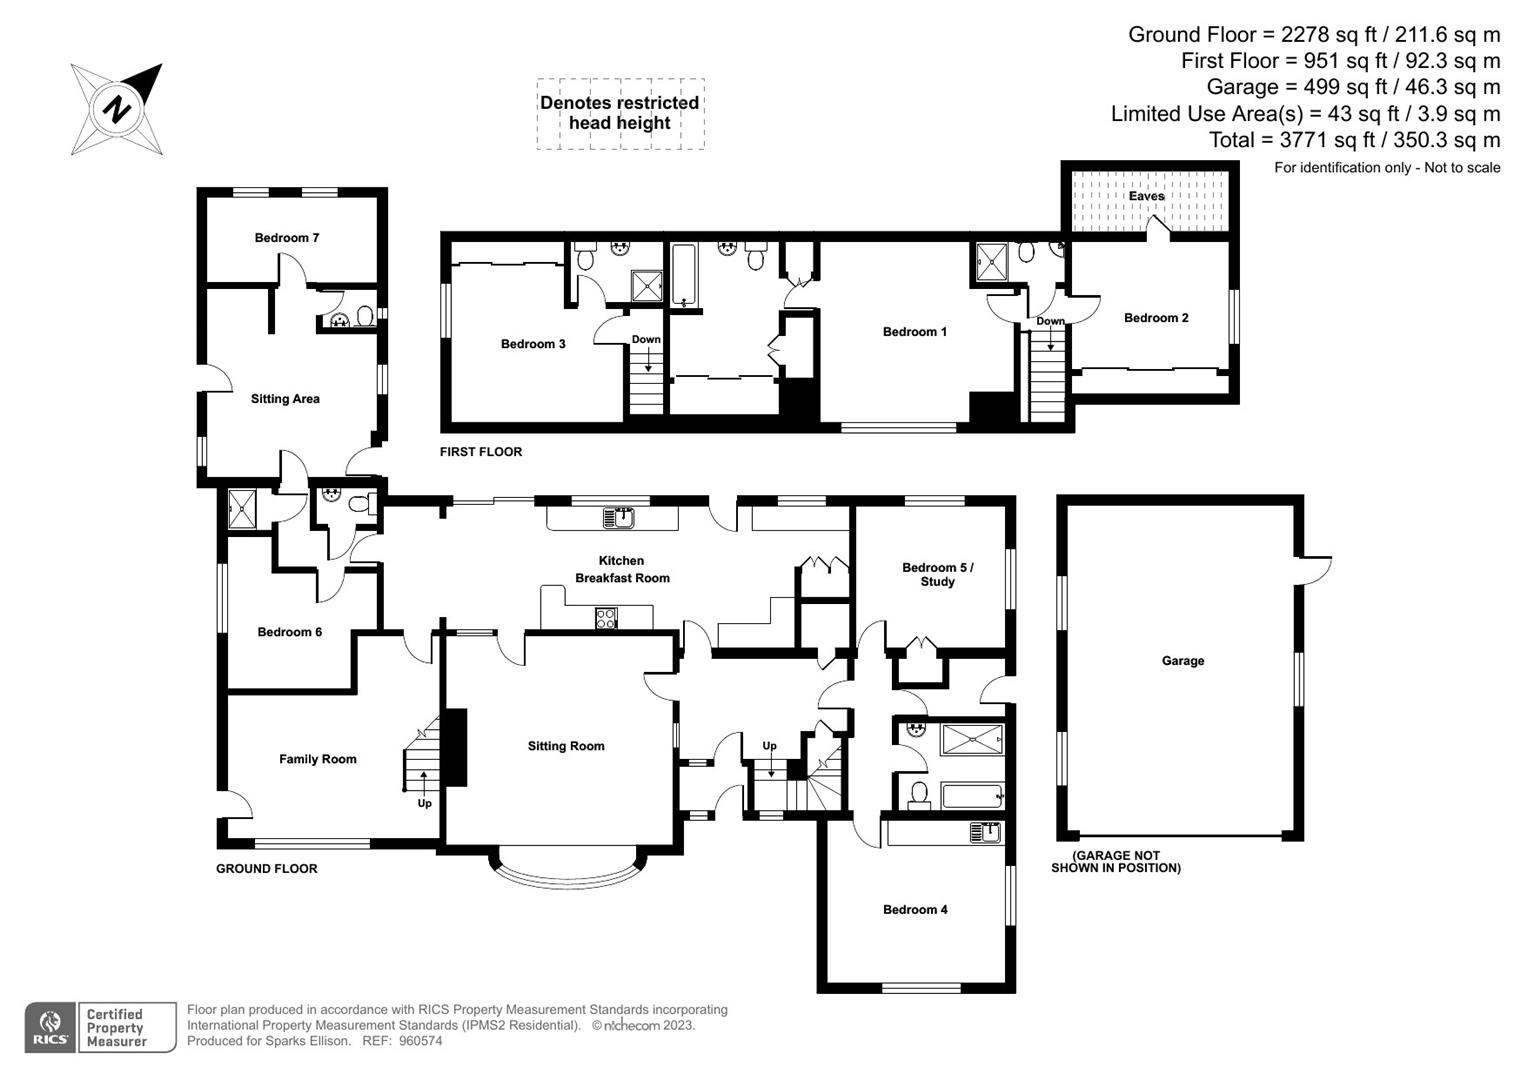 Winchester Road, Chandlers Ford floorplan